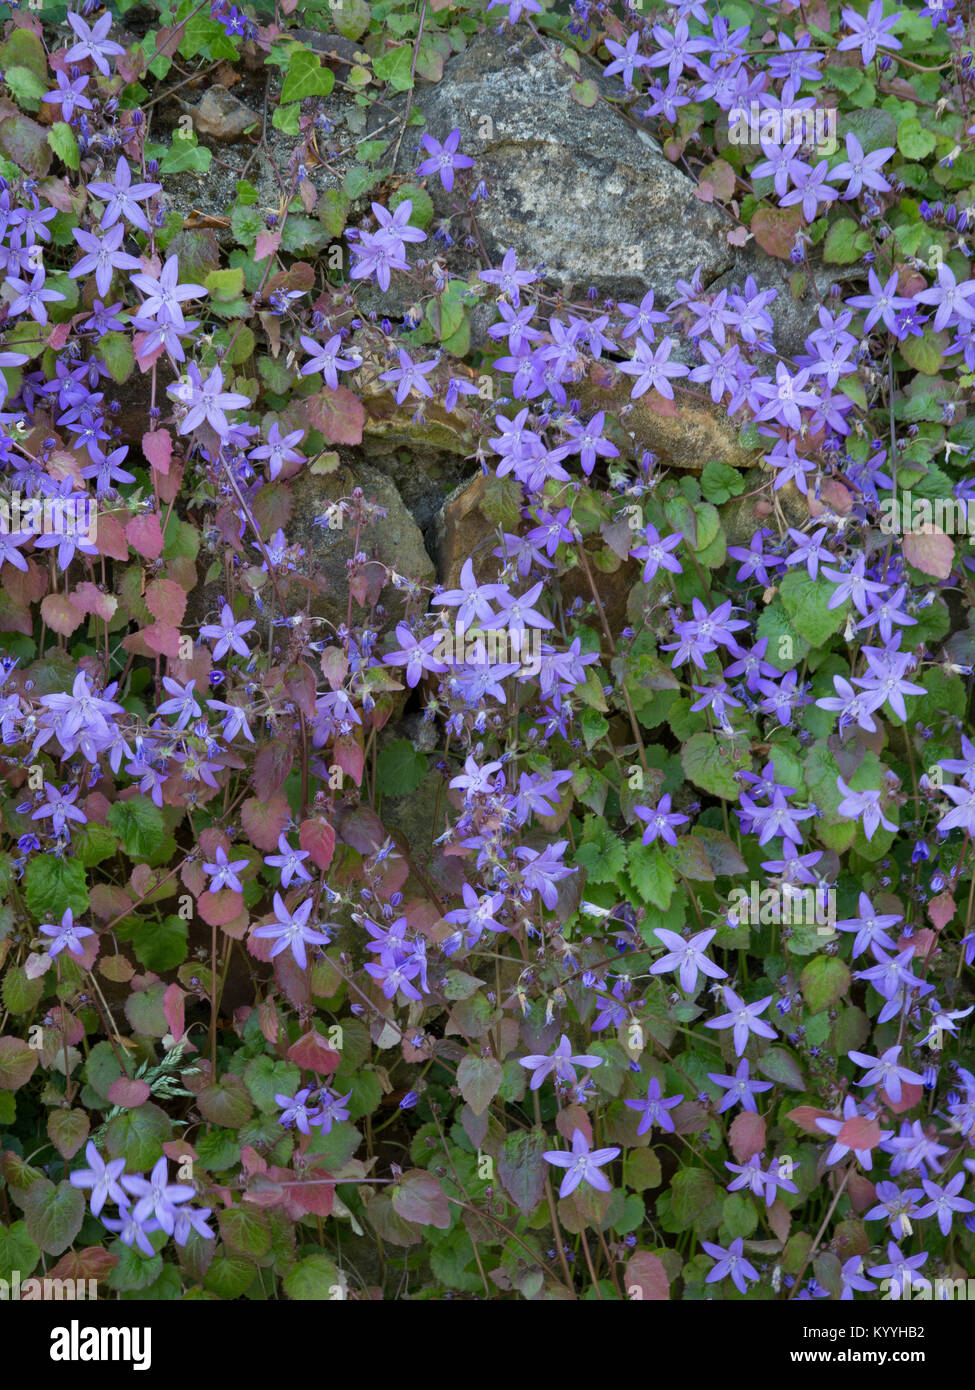 Starry blue flowers of Campanula porscharskyana the trailing bellflower covering a stone wall in south Wales UK Stock Photo